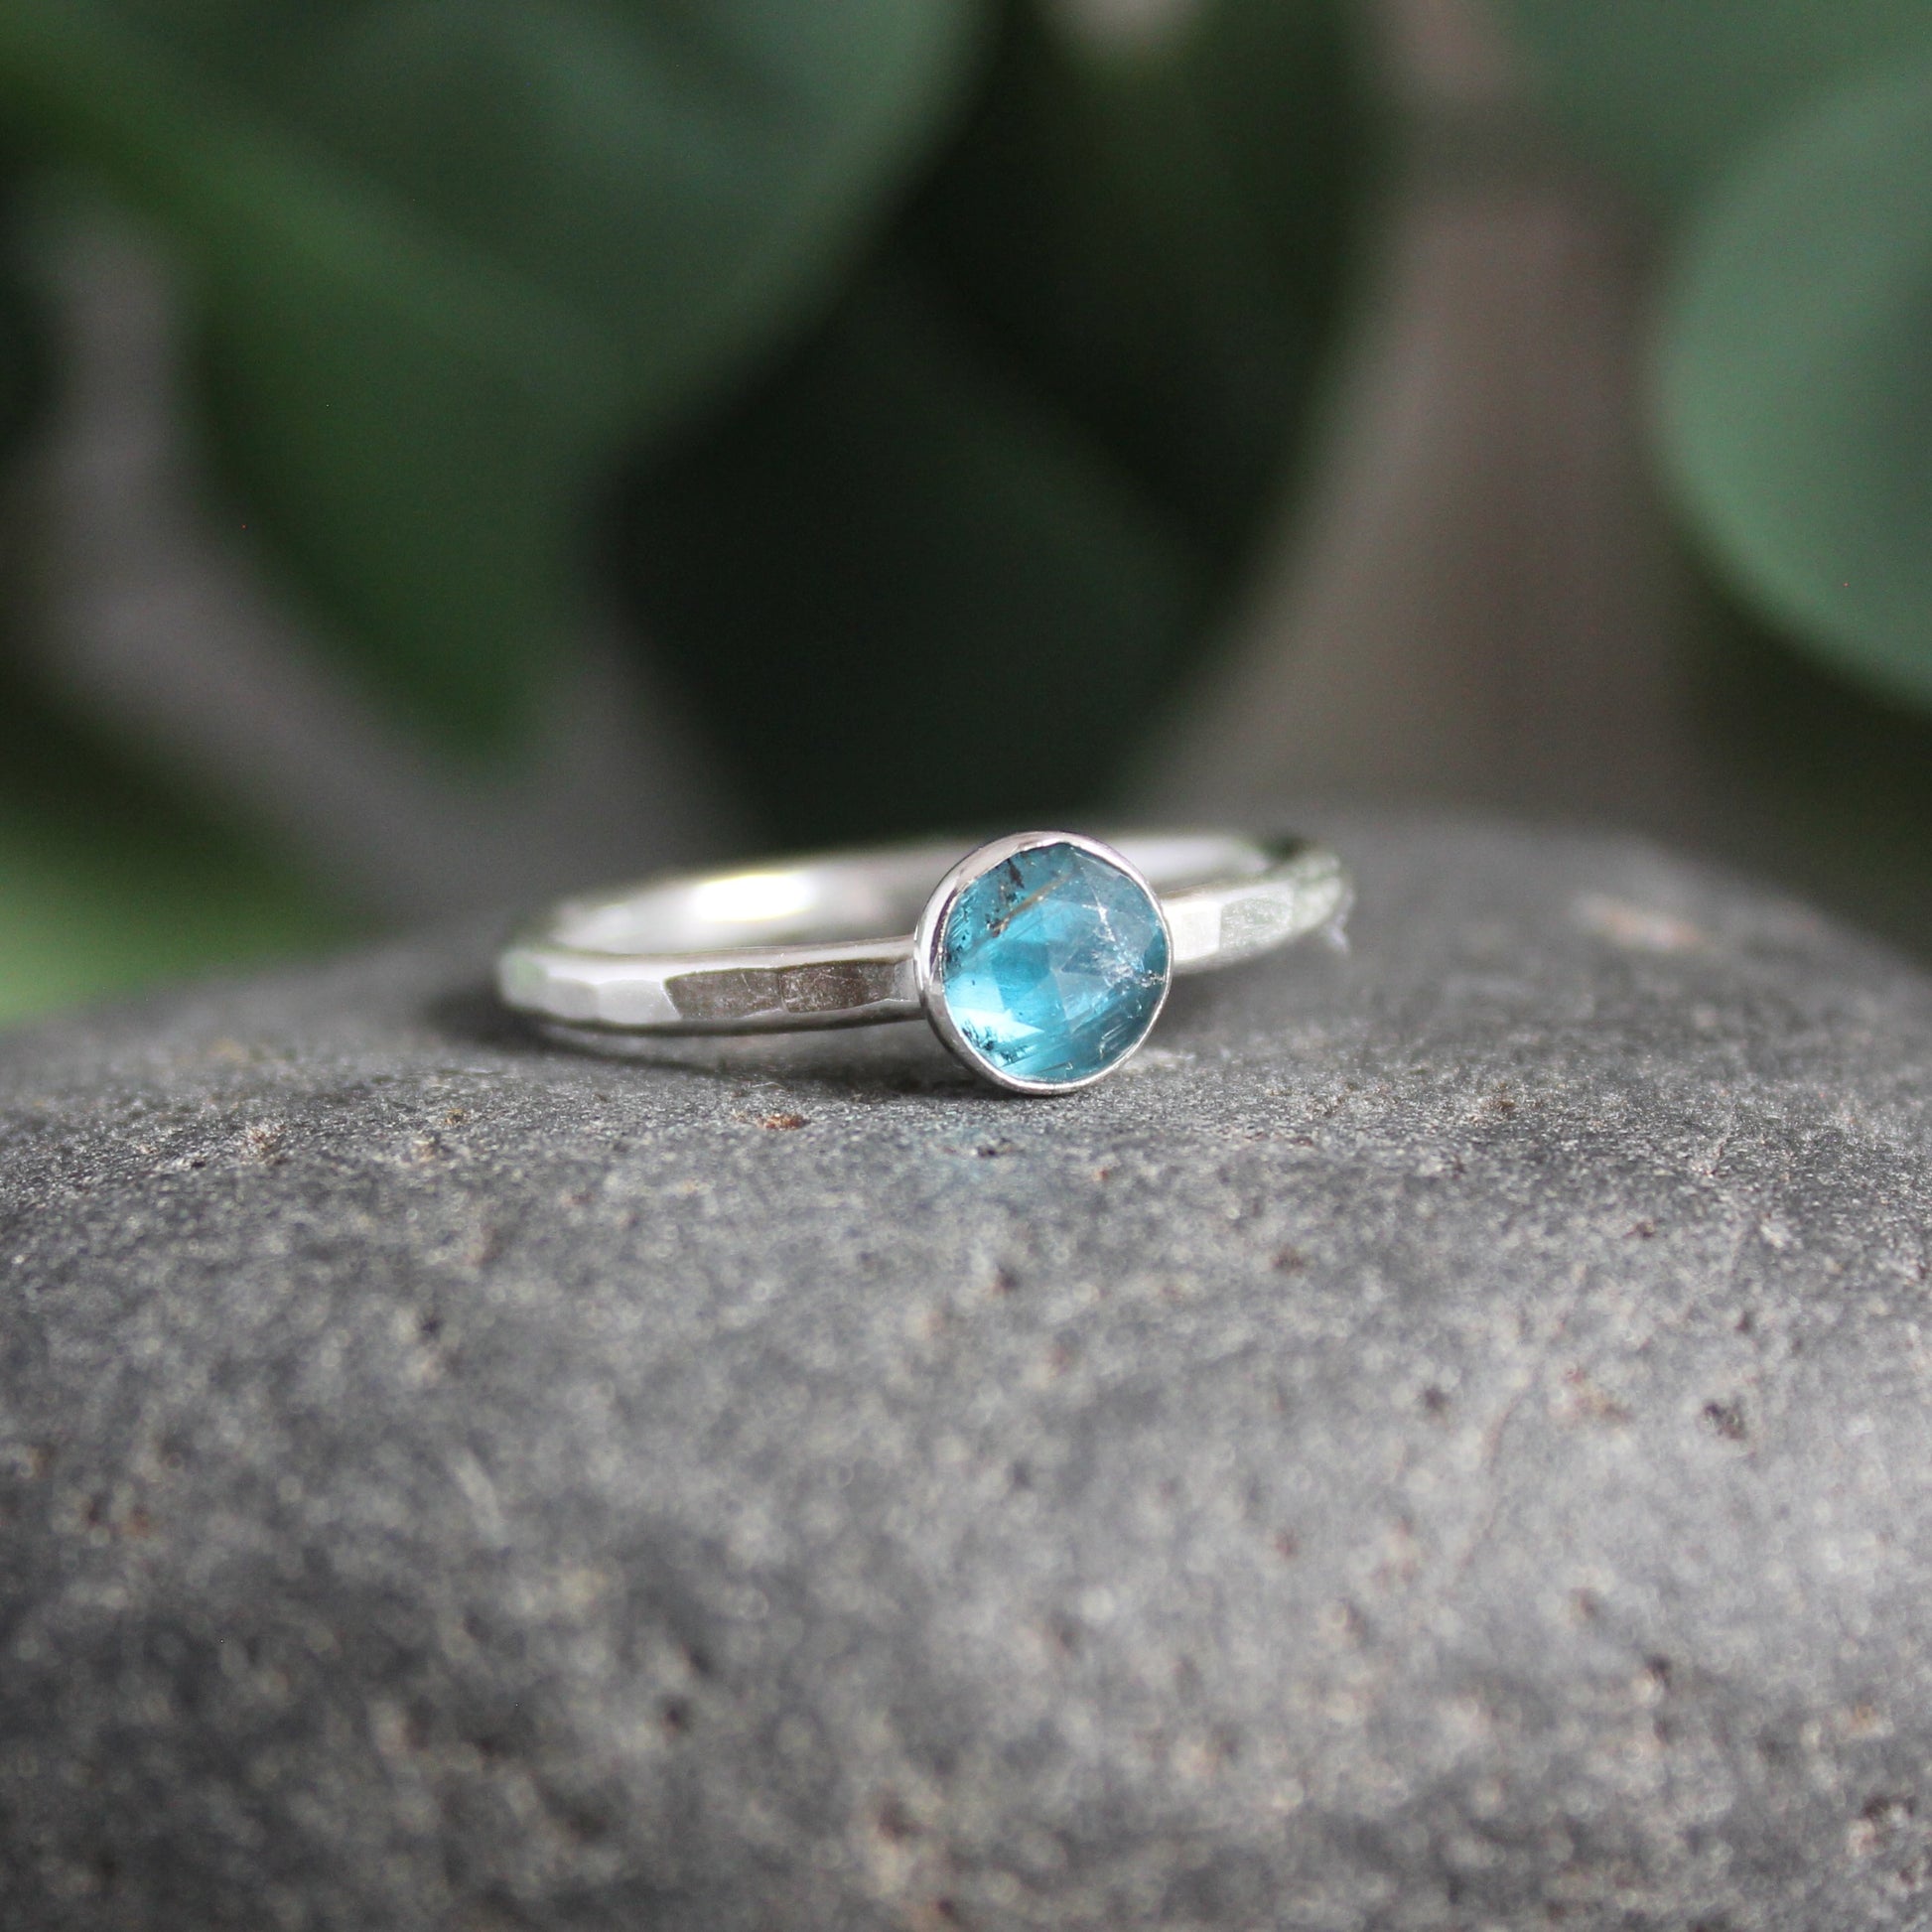 6mm rose cut teal moss kyanite set in a sterling silver bezel setting on a sturdy silver band. 